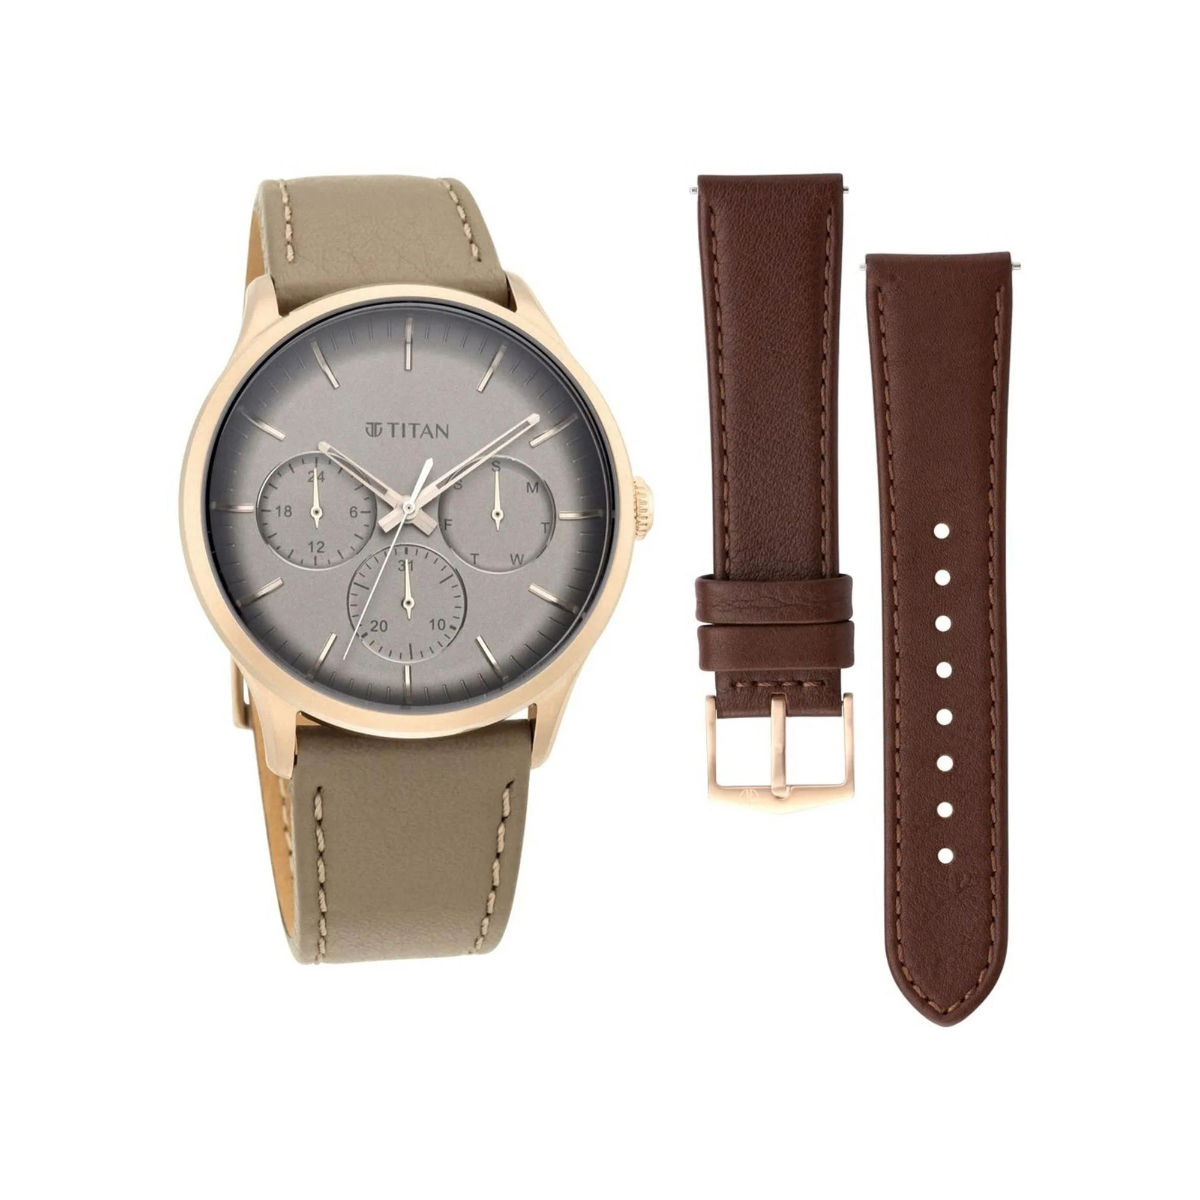 Stylish Titan Watch with Wildhorn Wallet n Pen Set to Agra, India